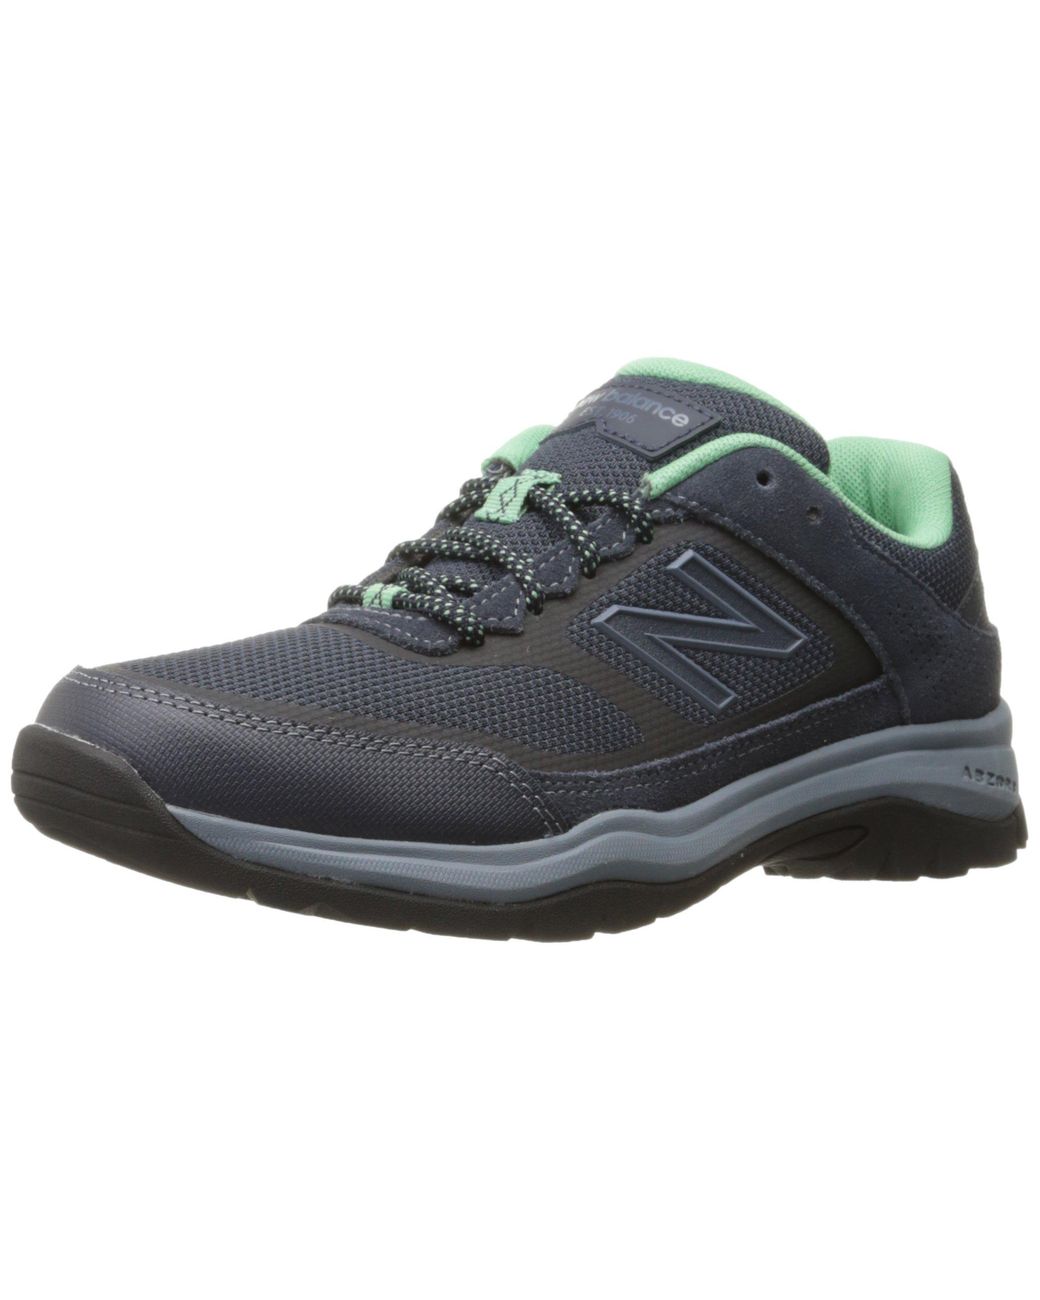 New Balance Synthetic 1300 V1 Walking Shoe in Grey (Gray) - Save 45% - Lyst